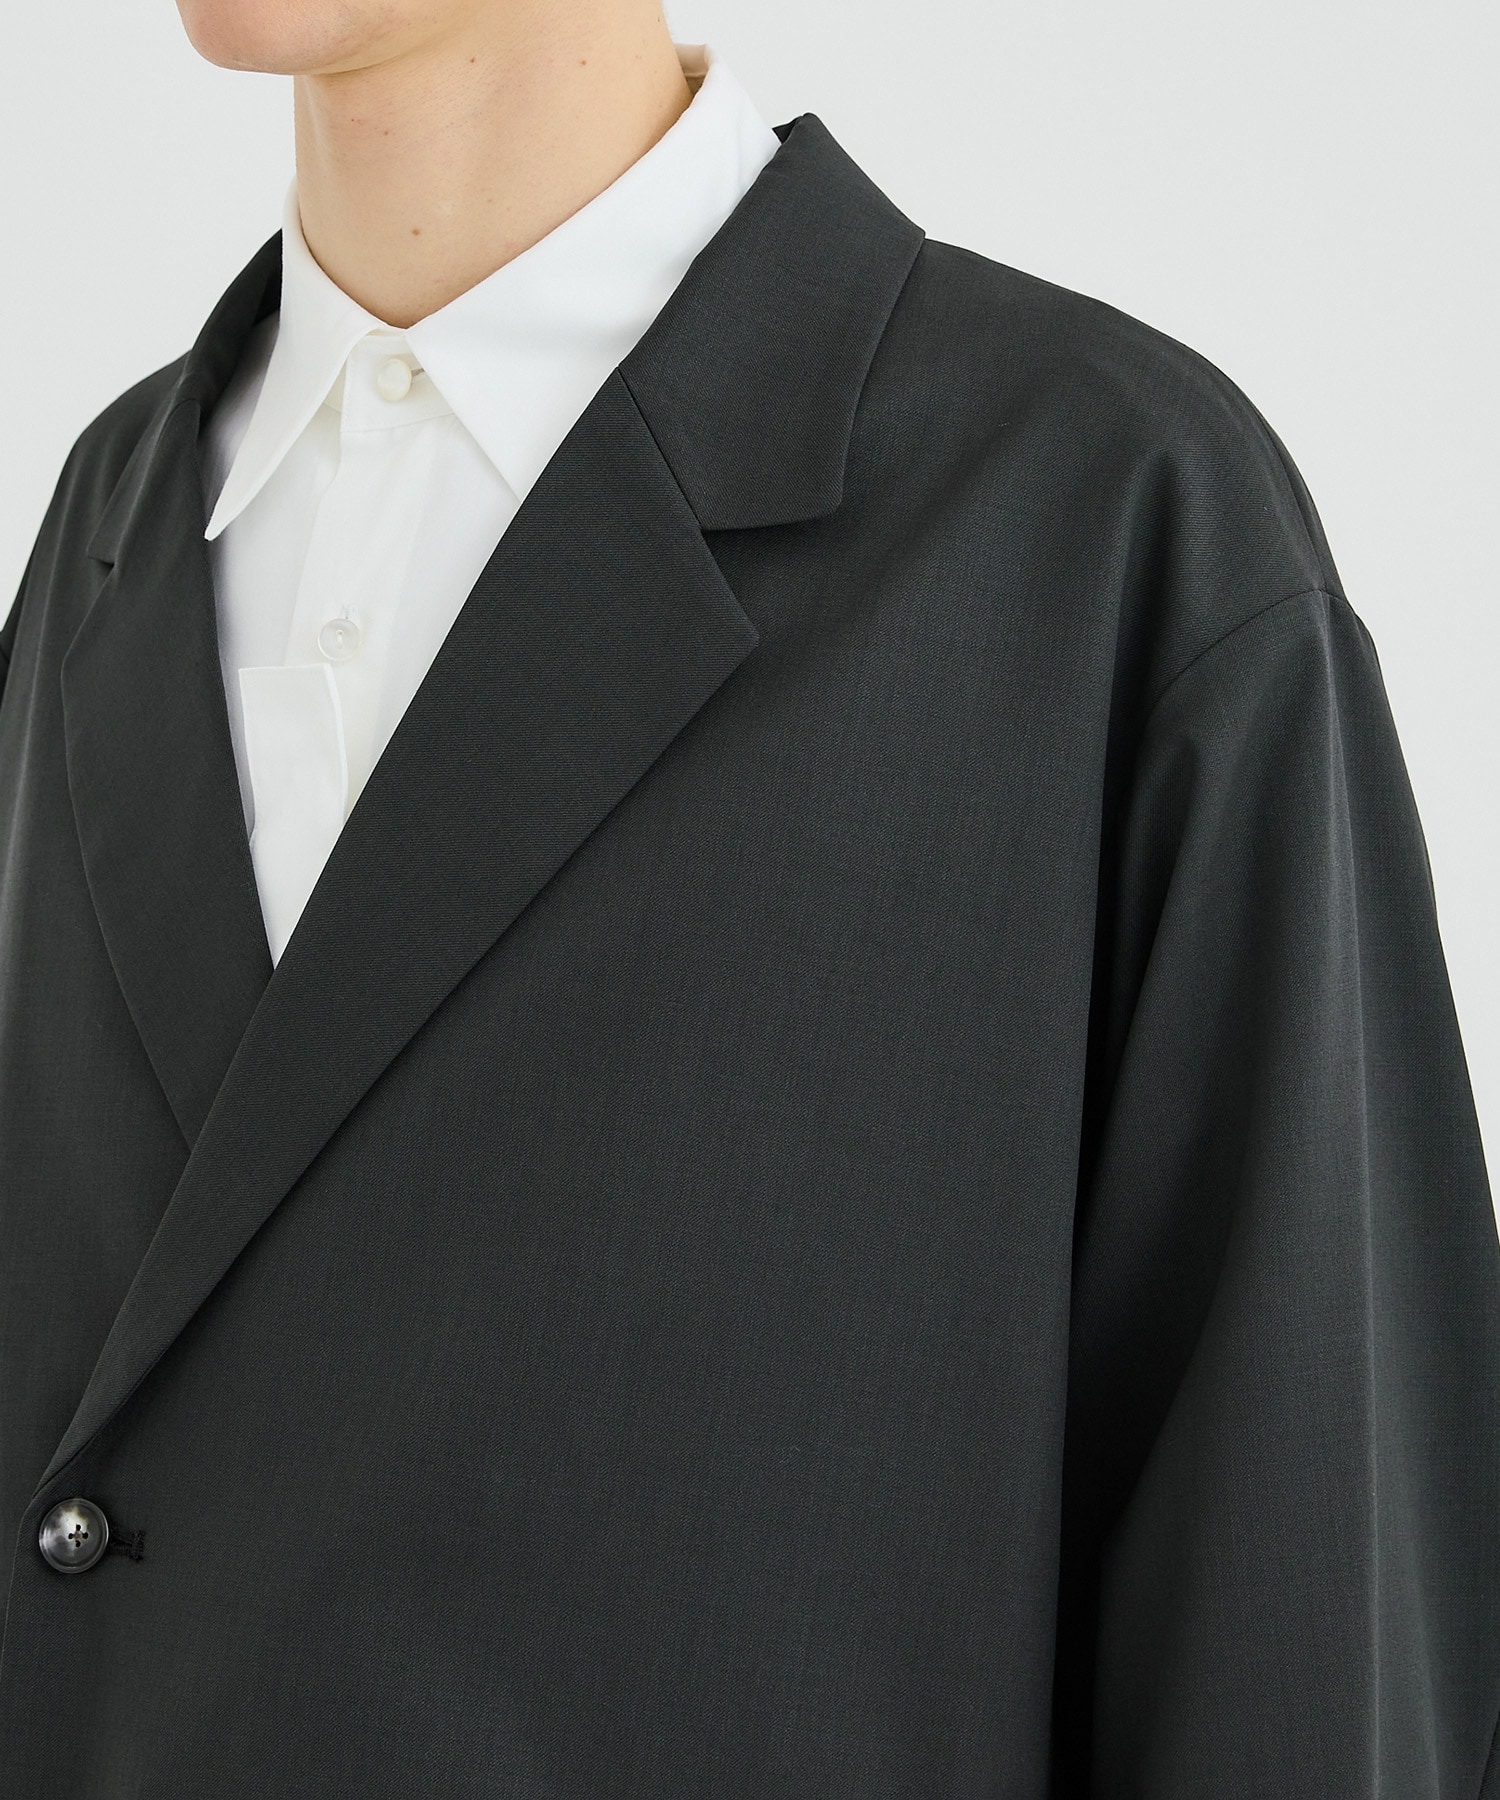 【×MENS NON-NO】T/W TAILORED JACKET LiNoH